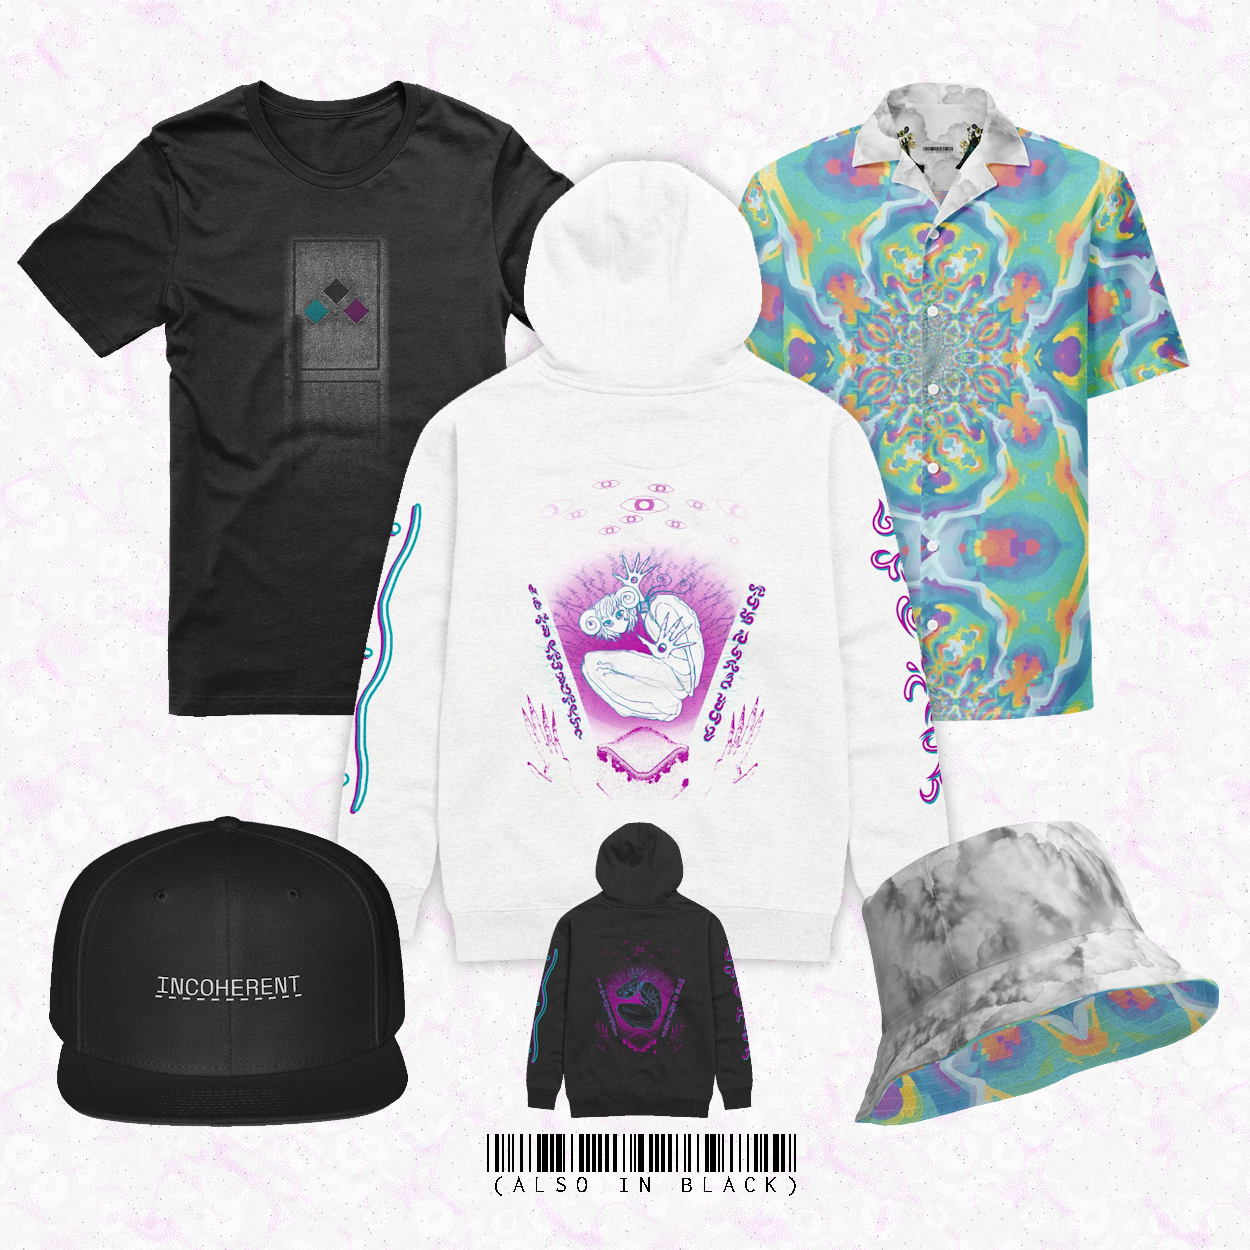 a black shirt with the corru.observer door, a psychadelic button shirt with teh unity pattern, a cool white hoodie (also in black) with a design of akizet, a black cap with incoherent on it, and a cloud/unity design bucket hat